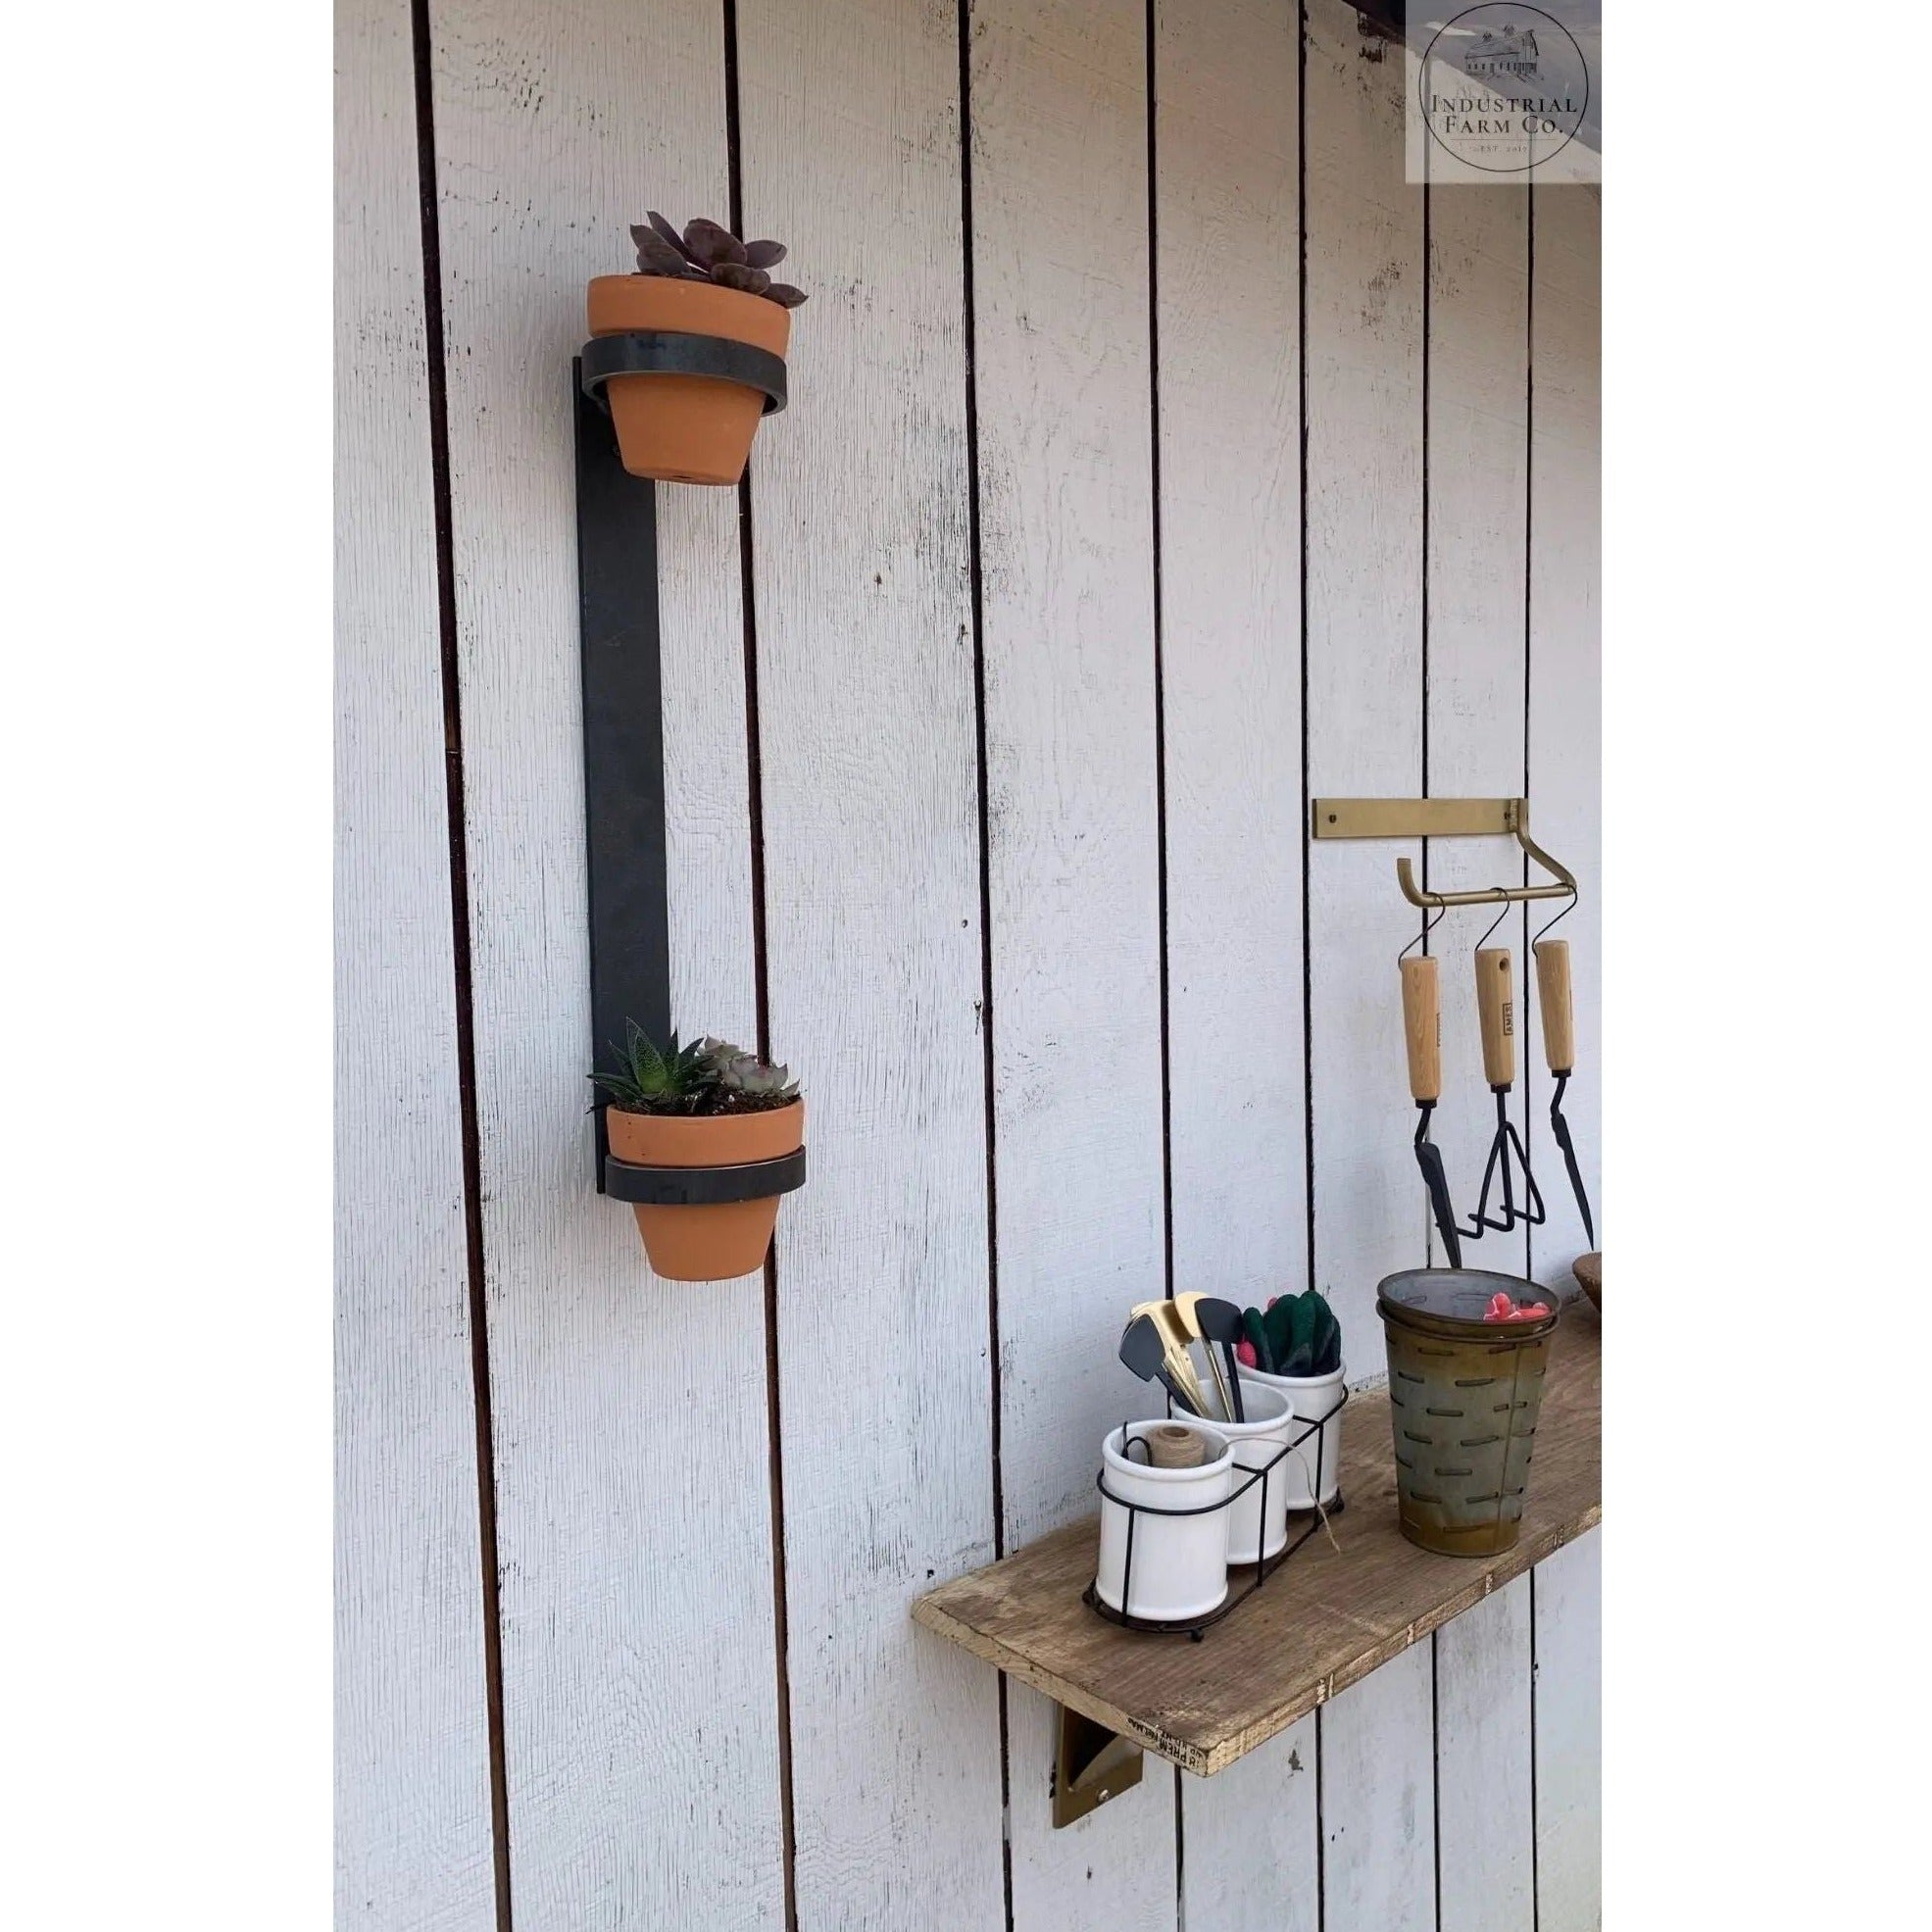 The Watertown Wall Mount Vertical Planter Plant Holder 24" Style 6" Pots | Industrial Farm Co